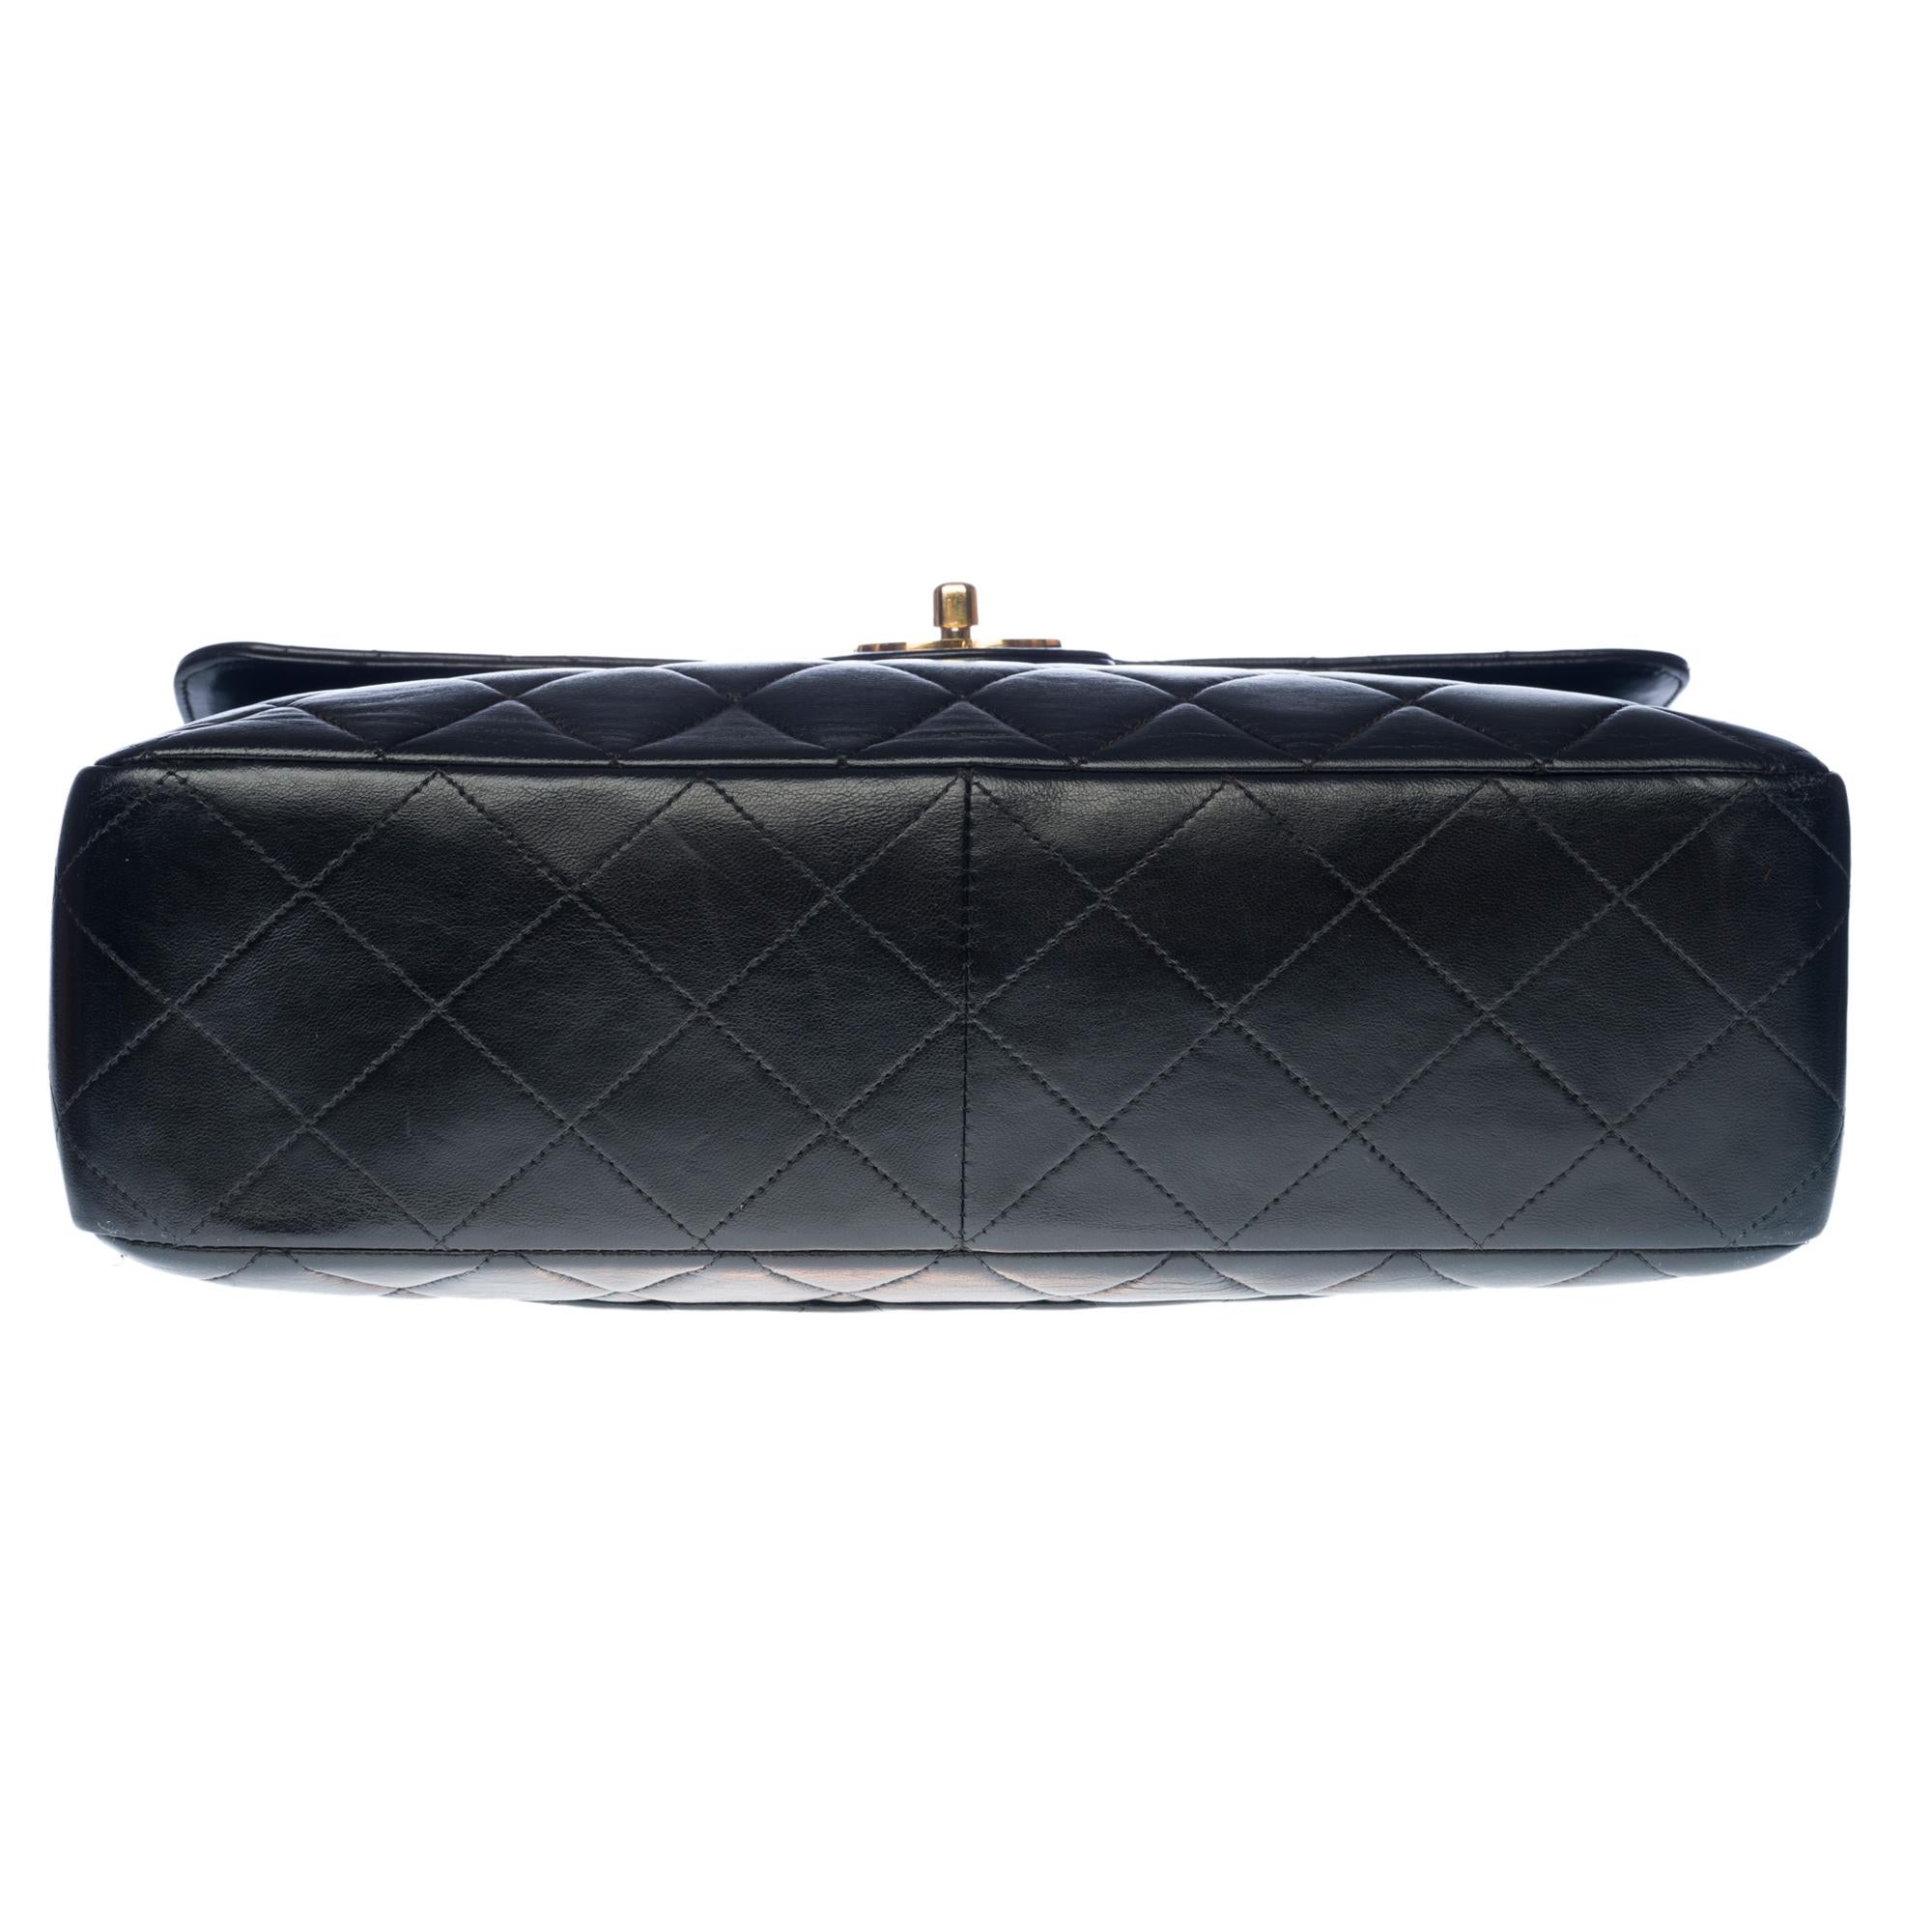 Chanel Timeless Jumbo single shoulder flap bag in black quilted lambskin, GHW 4